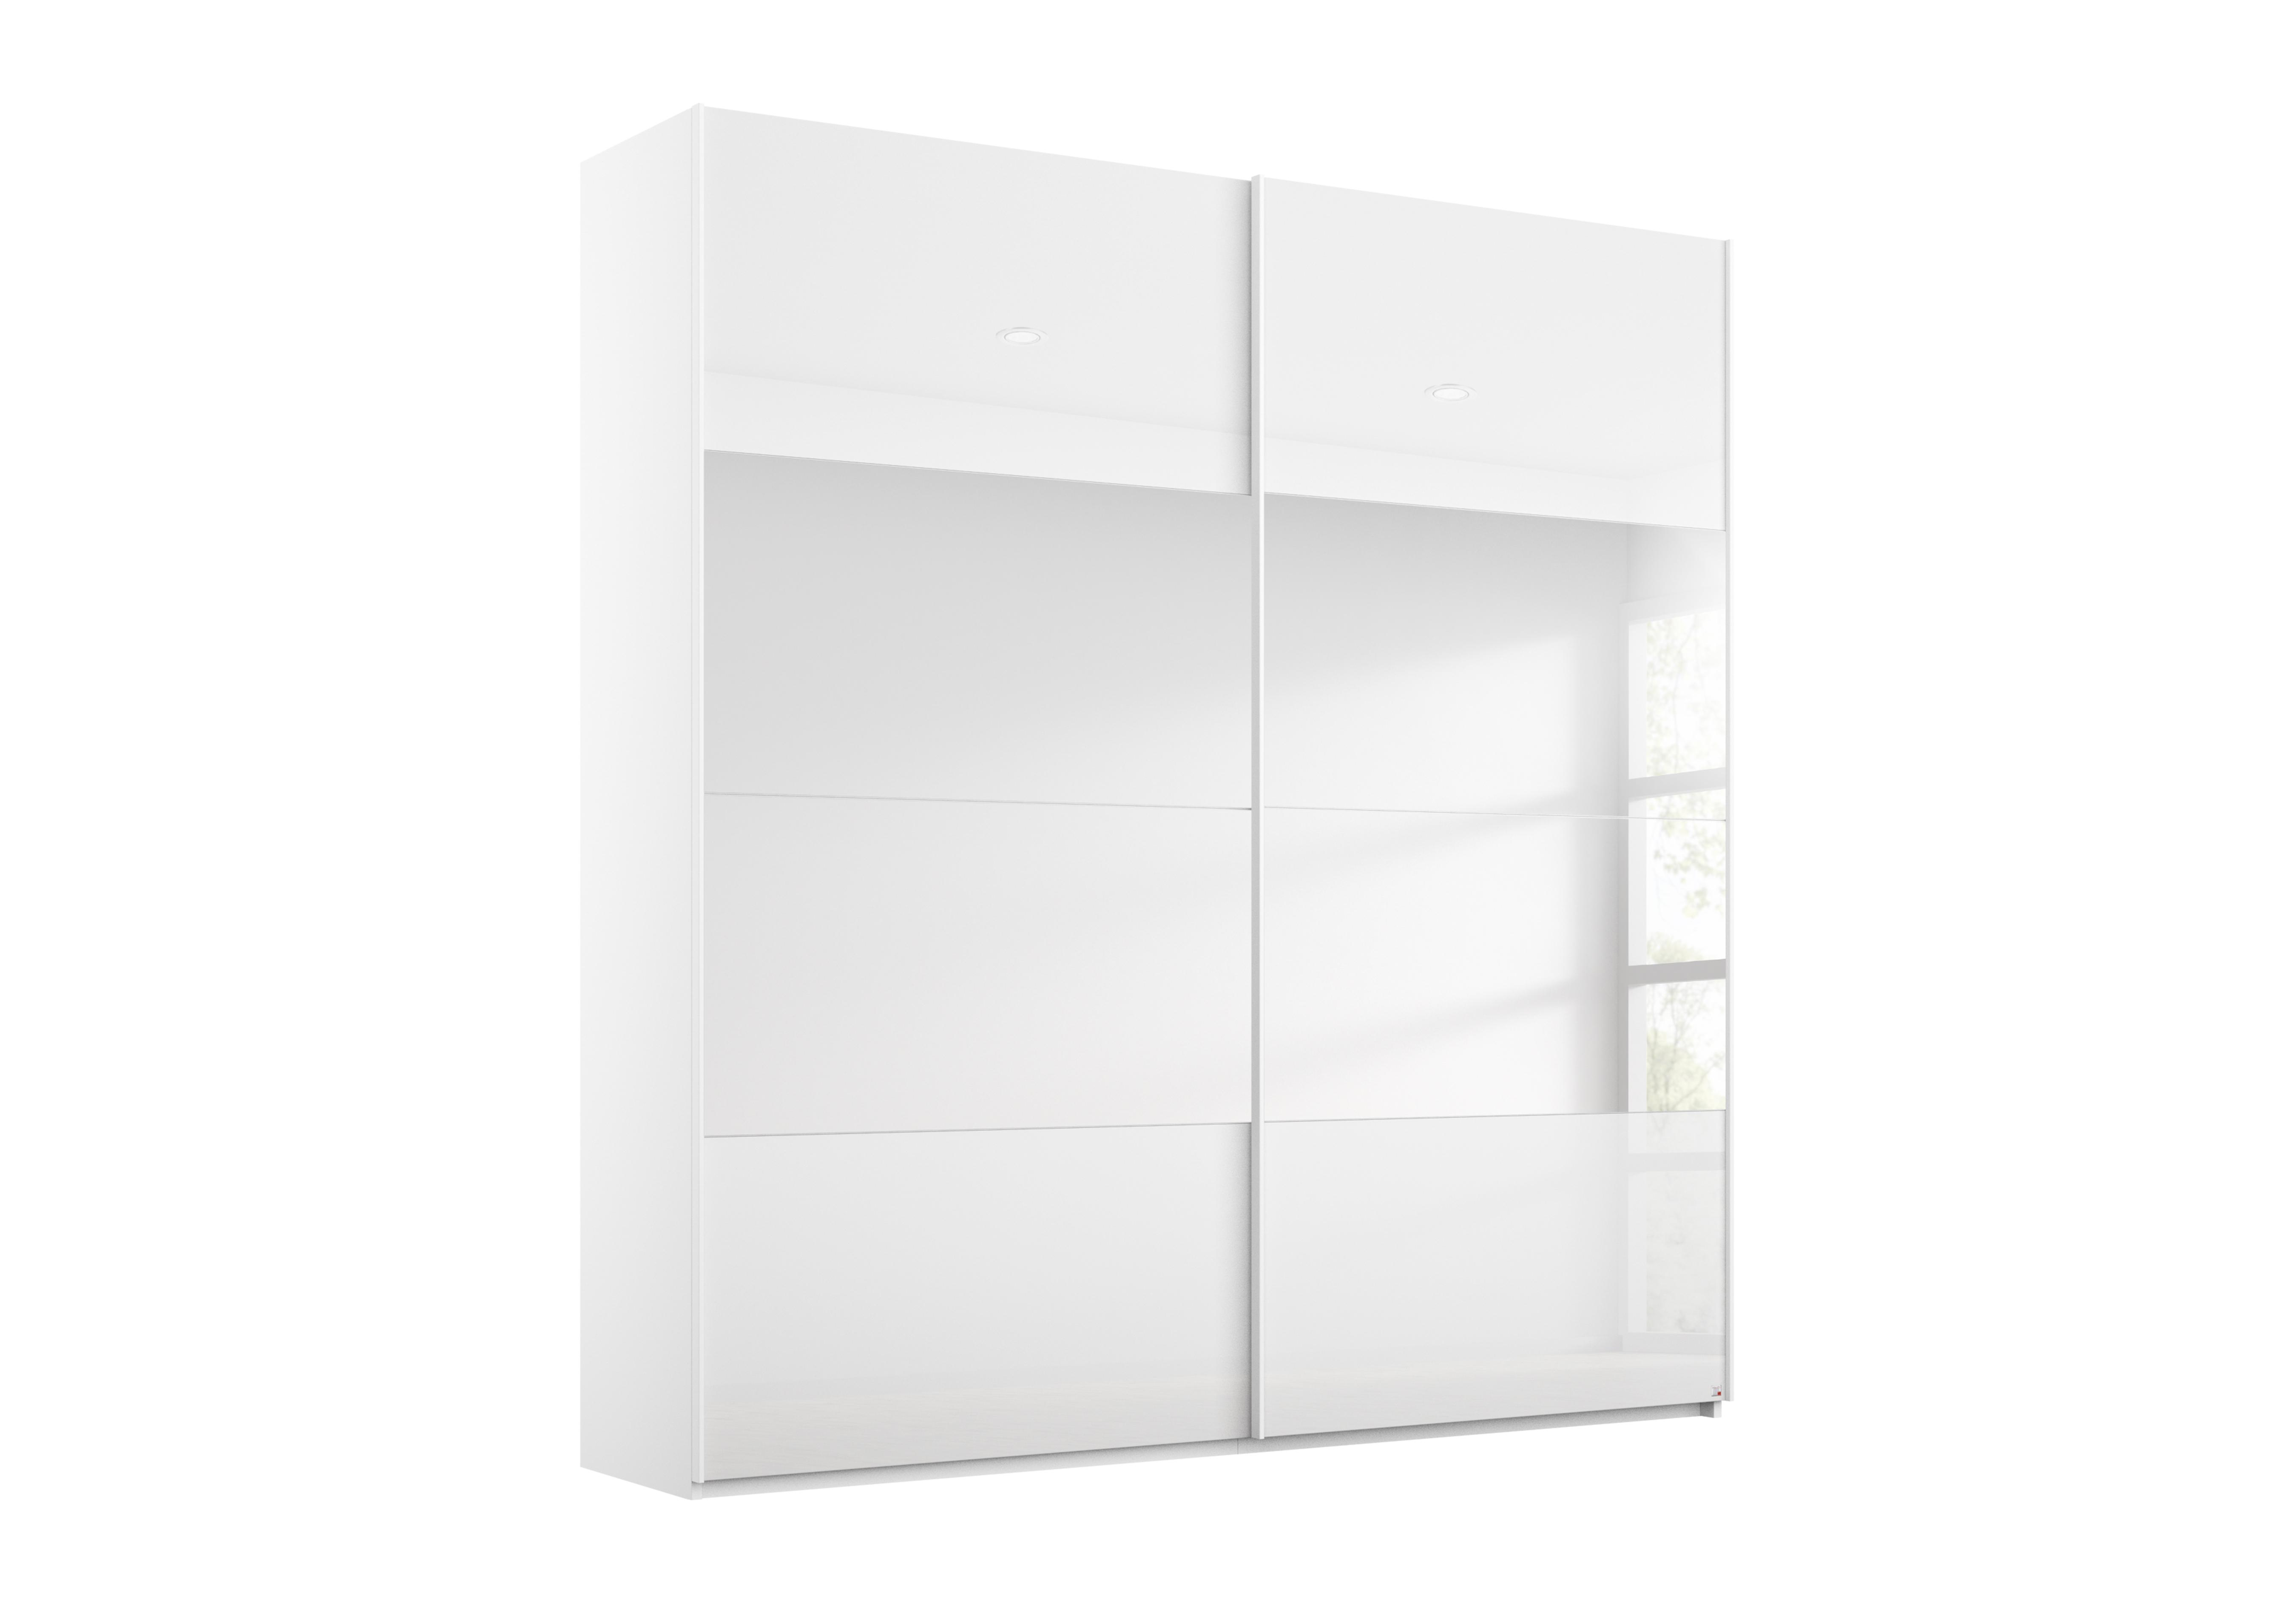 Formes Glass 2 Door Sliding Wardrobe with Mirror in A131b White White Front on Furniture Village